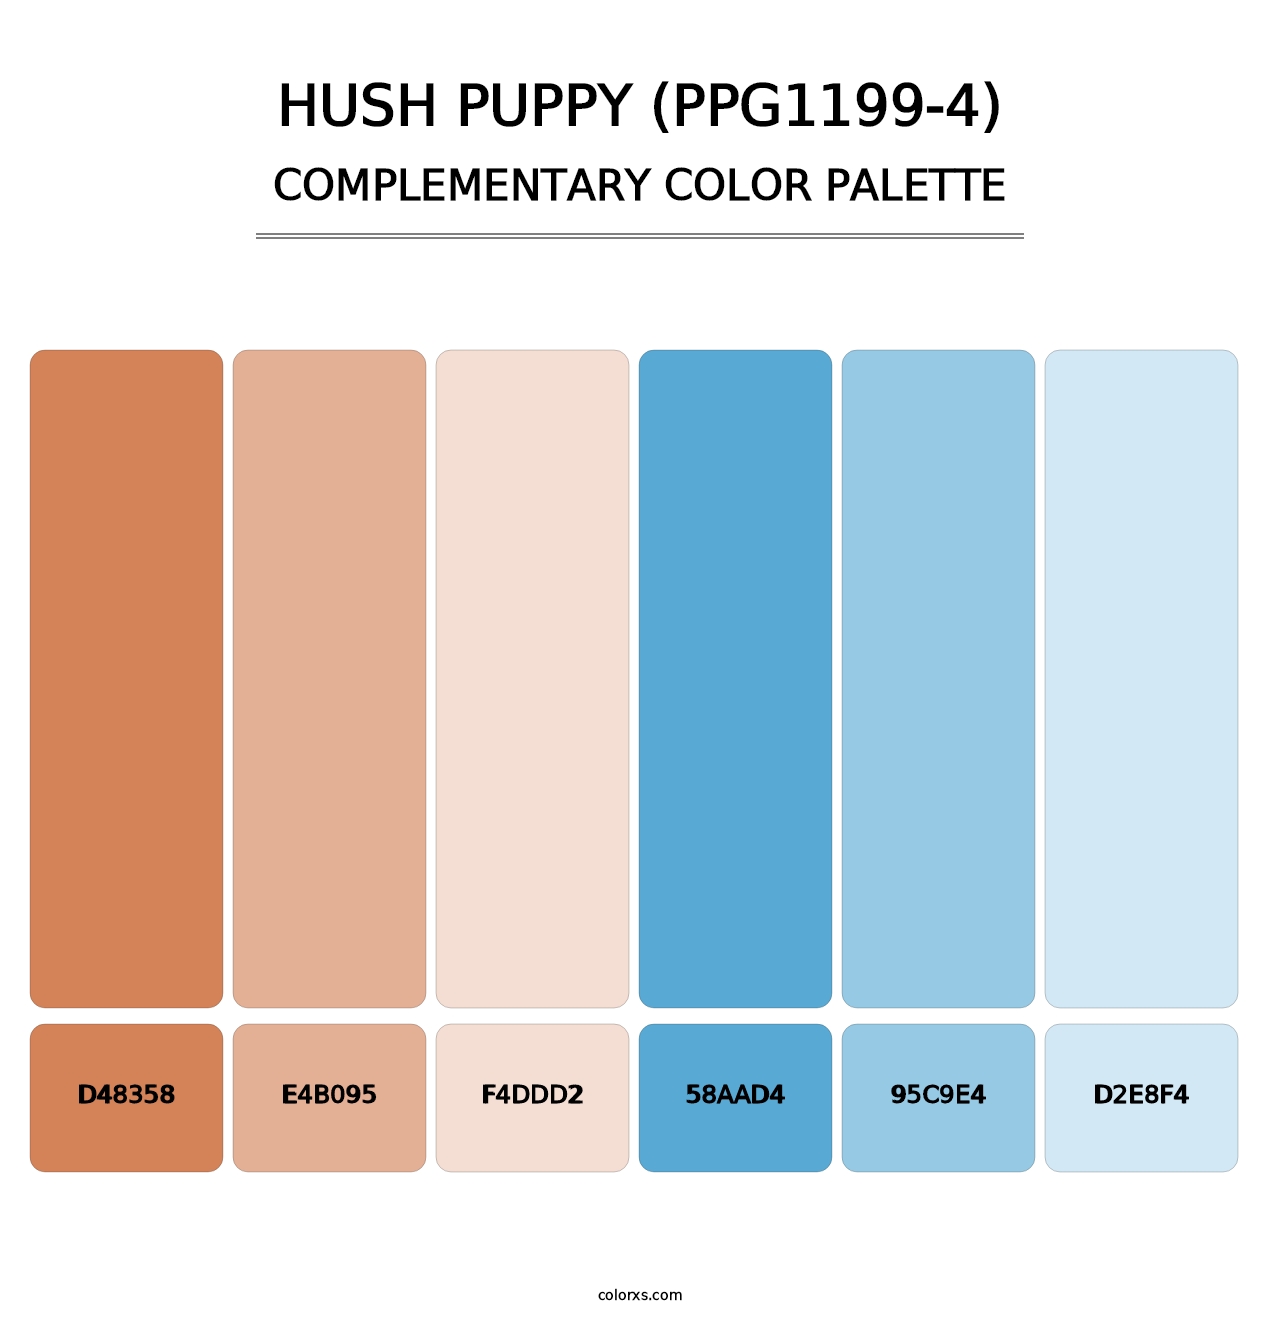 Hush Puppy (PPG1199-4) - Complementary Color Palette